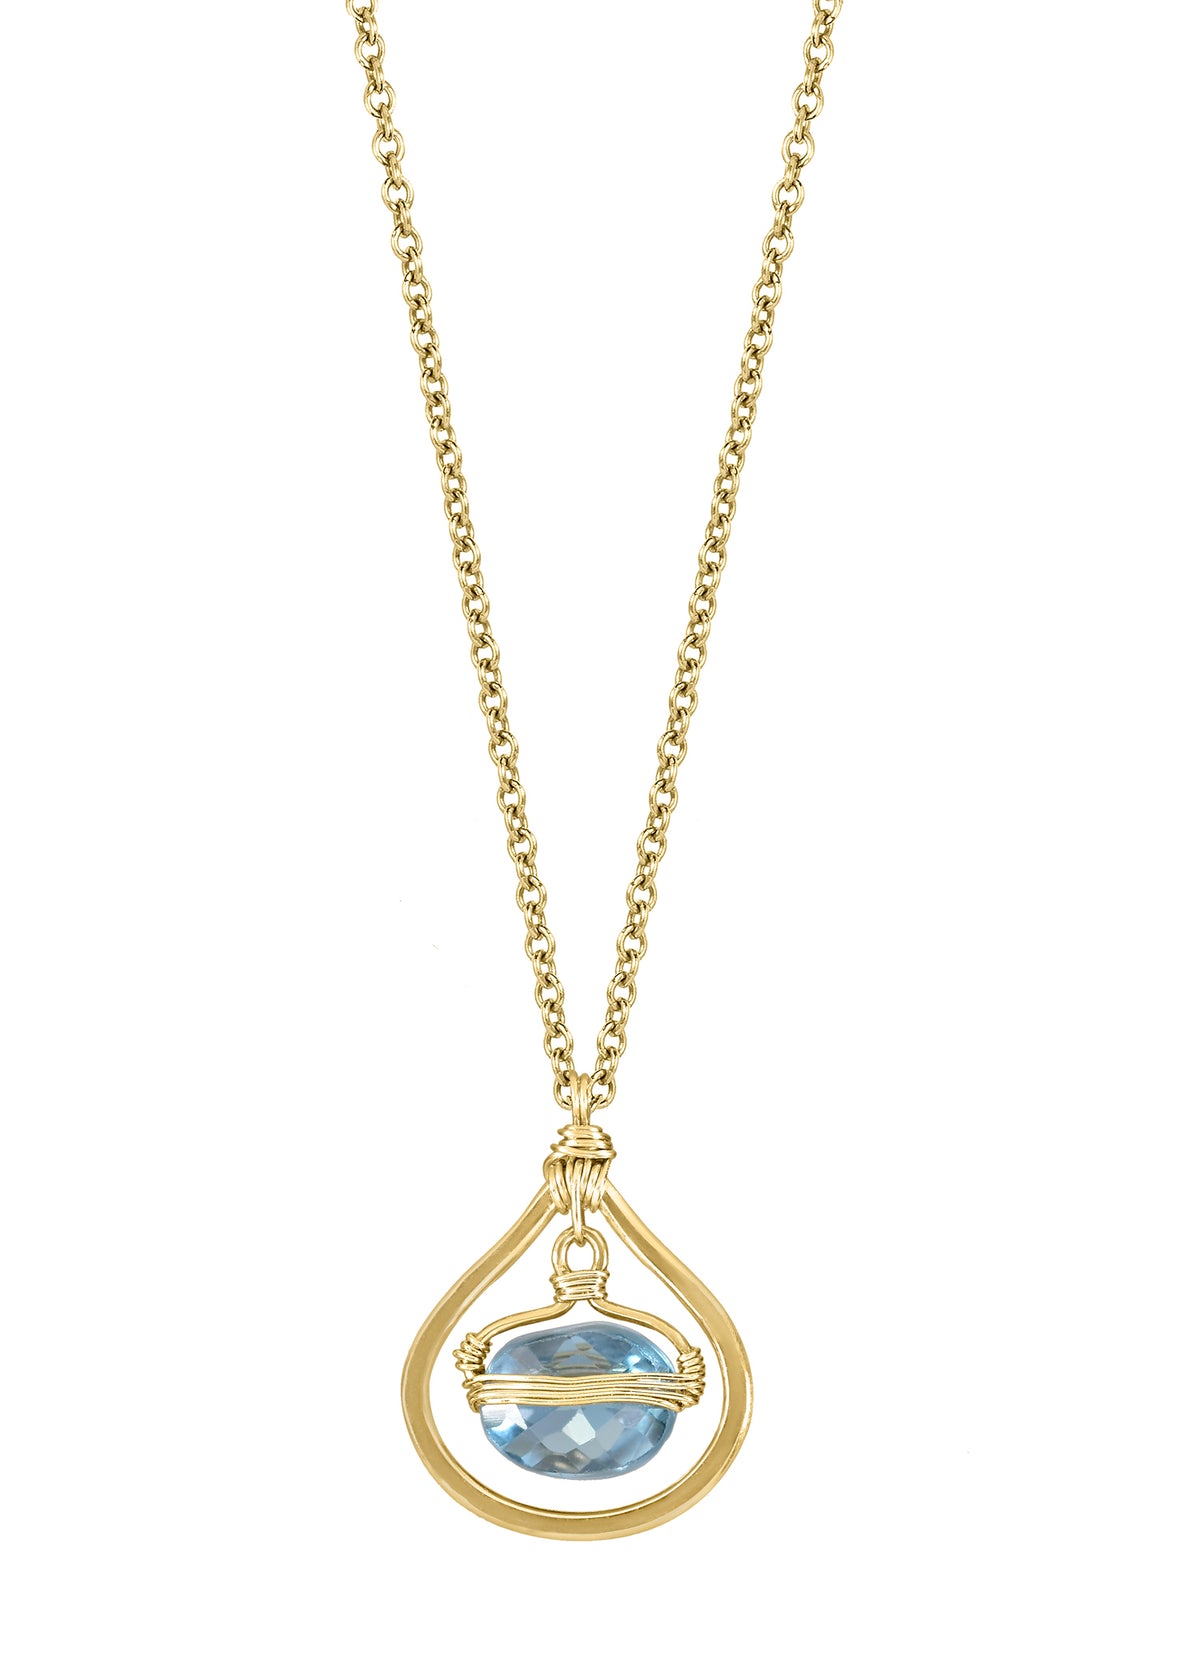 London blue topaz 14k gold fill Necklace measures 16&quot; in length Pendant measures 1/2&quot; in length and 1/2&quot; in width at the widest point Handmade in our Los Angeles studio